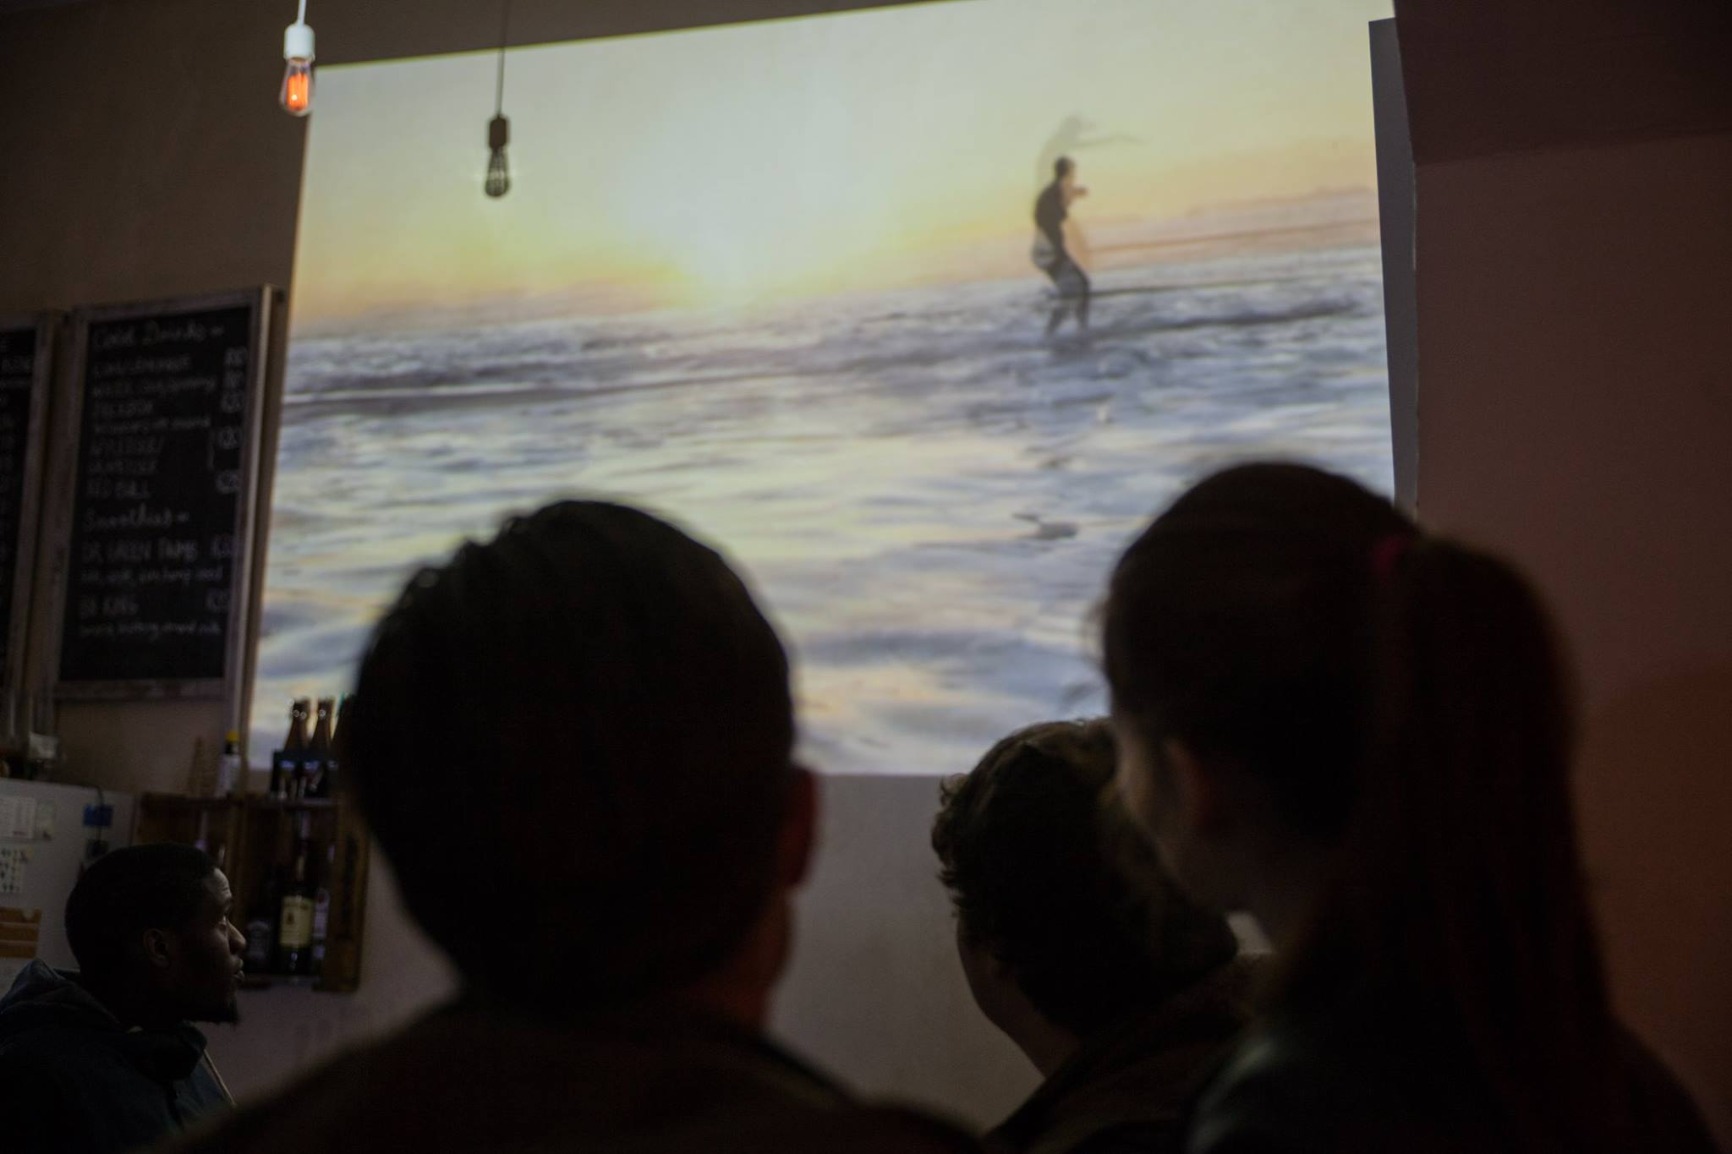 Photo of Ode to An Architect film screening showing the silhouettes of three people in the audience watching the film on a projector. The scene still shows a figure dancing at the ocean.